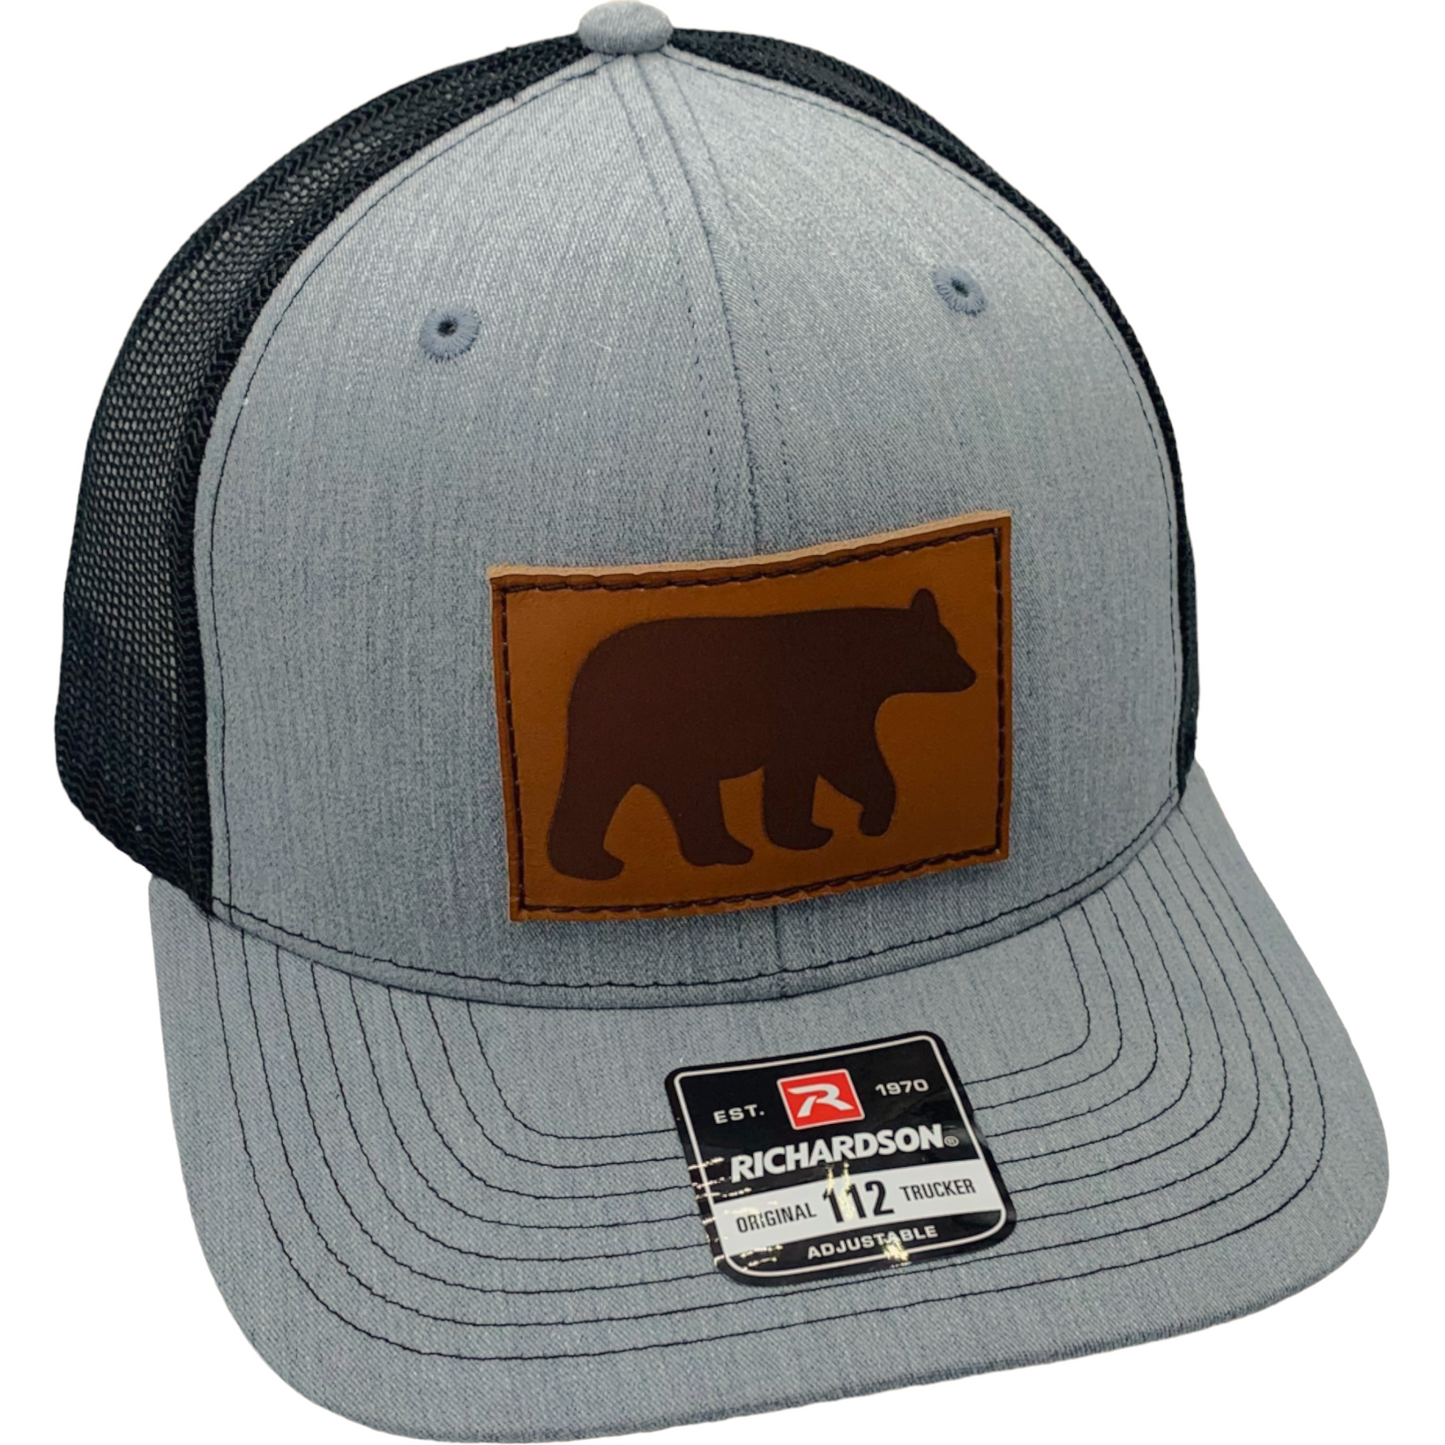 Burton Leather Patch Trucker Baseball Hat Grey and Black - The ASHEVILLE Co. TM